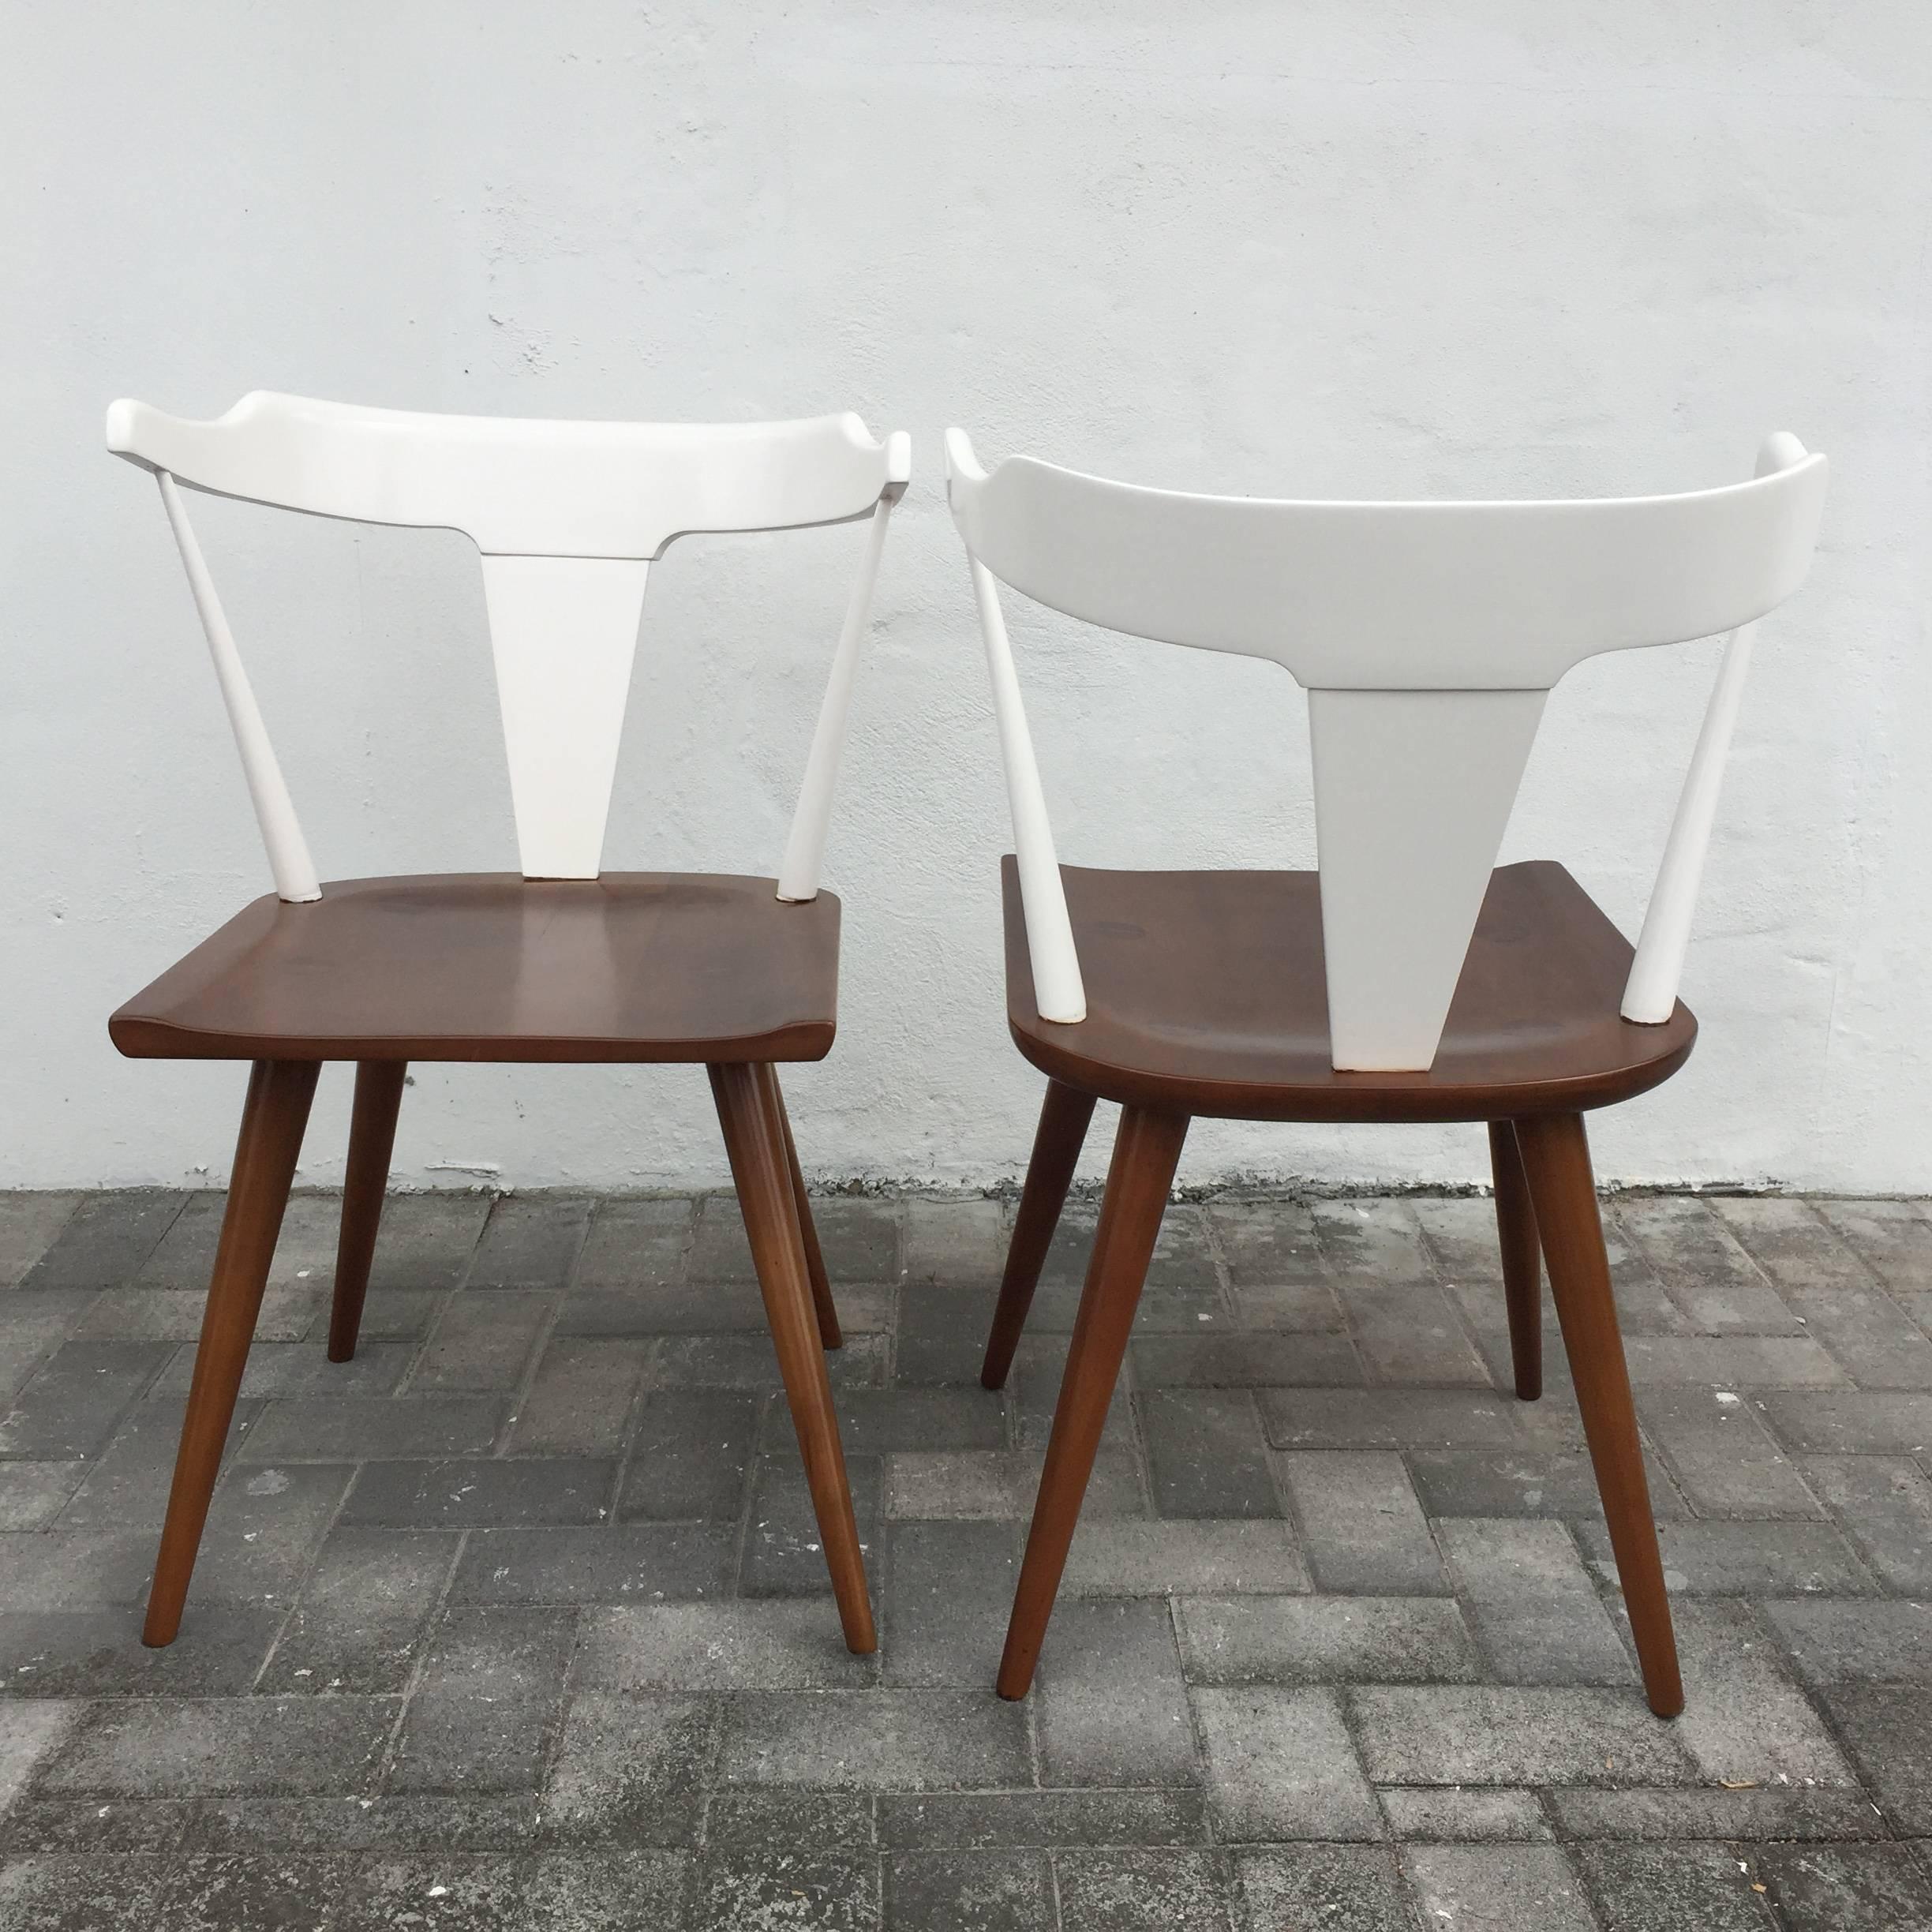 Lacquered Vintage Paul McCobb Two-Tone Planner Chairs, PAIR For Sale